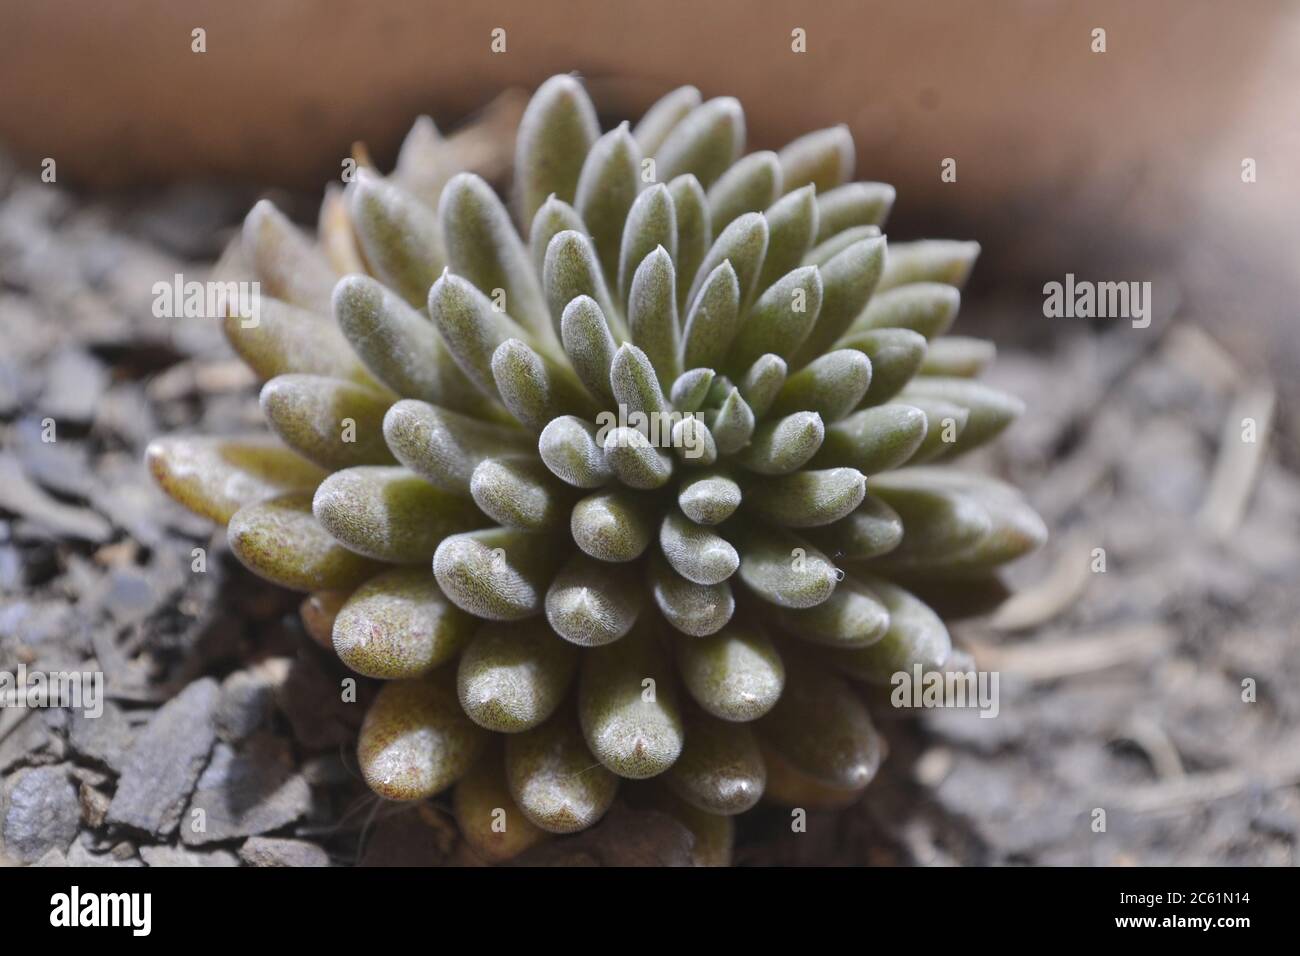 Plant Succulent, plant grown in pots in a home garden, in Brazil, scientific name of Apocynaceae, plants with root and stem, large water storage, phot Stock Photo